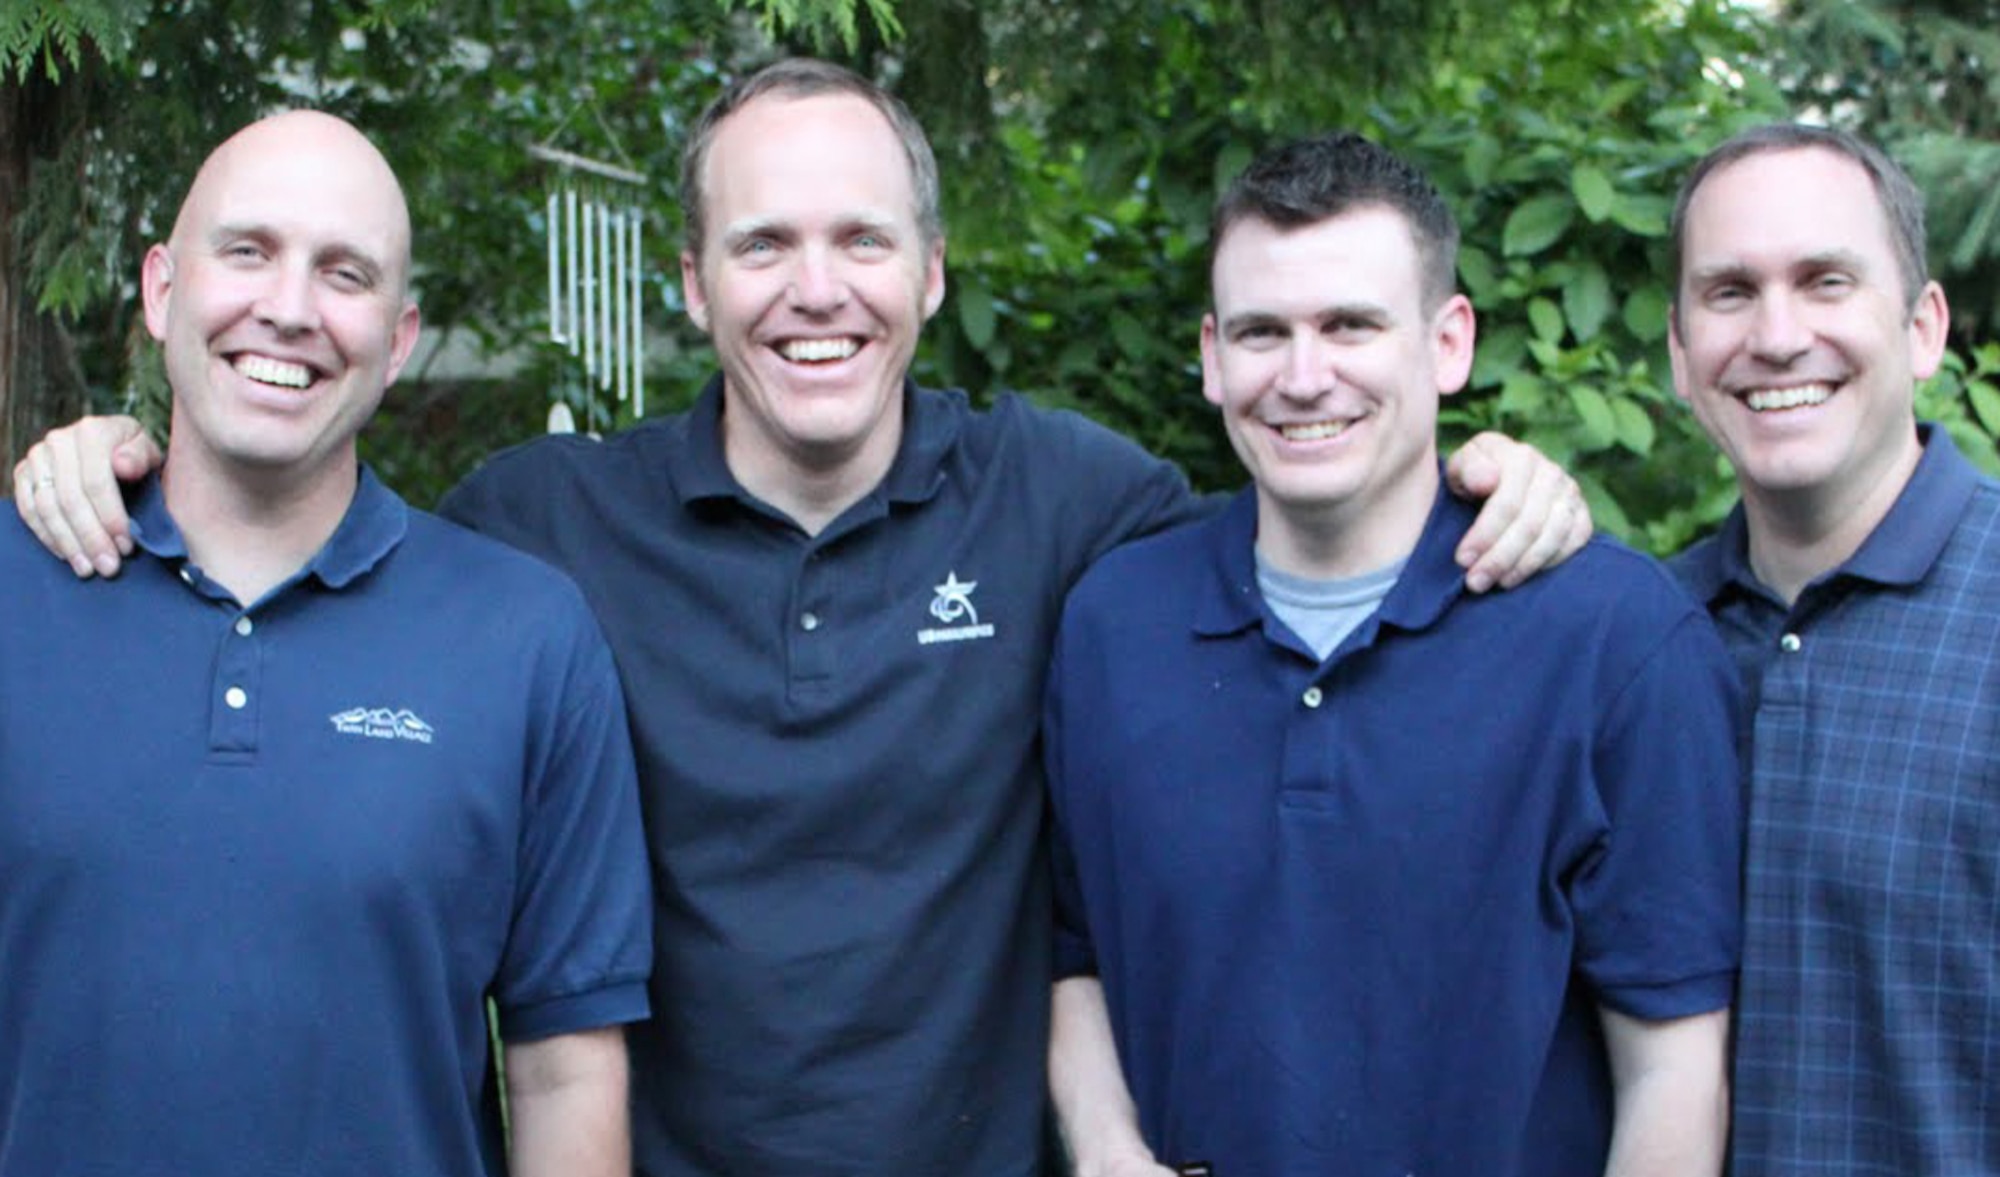 From left to right, Clark, Sean, Regan and Daniel Halsted pose for a family photo in 2011.  Sean, a former senior airman who was injured during a training exercise in 1998, will be competing in the 2014 Sochi Paralympic Winter Games. All four brothers have served or are currently serving in the Air Force.  (Courtesy photo/Tech. Sgt. Regan Halsted)